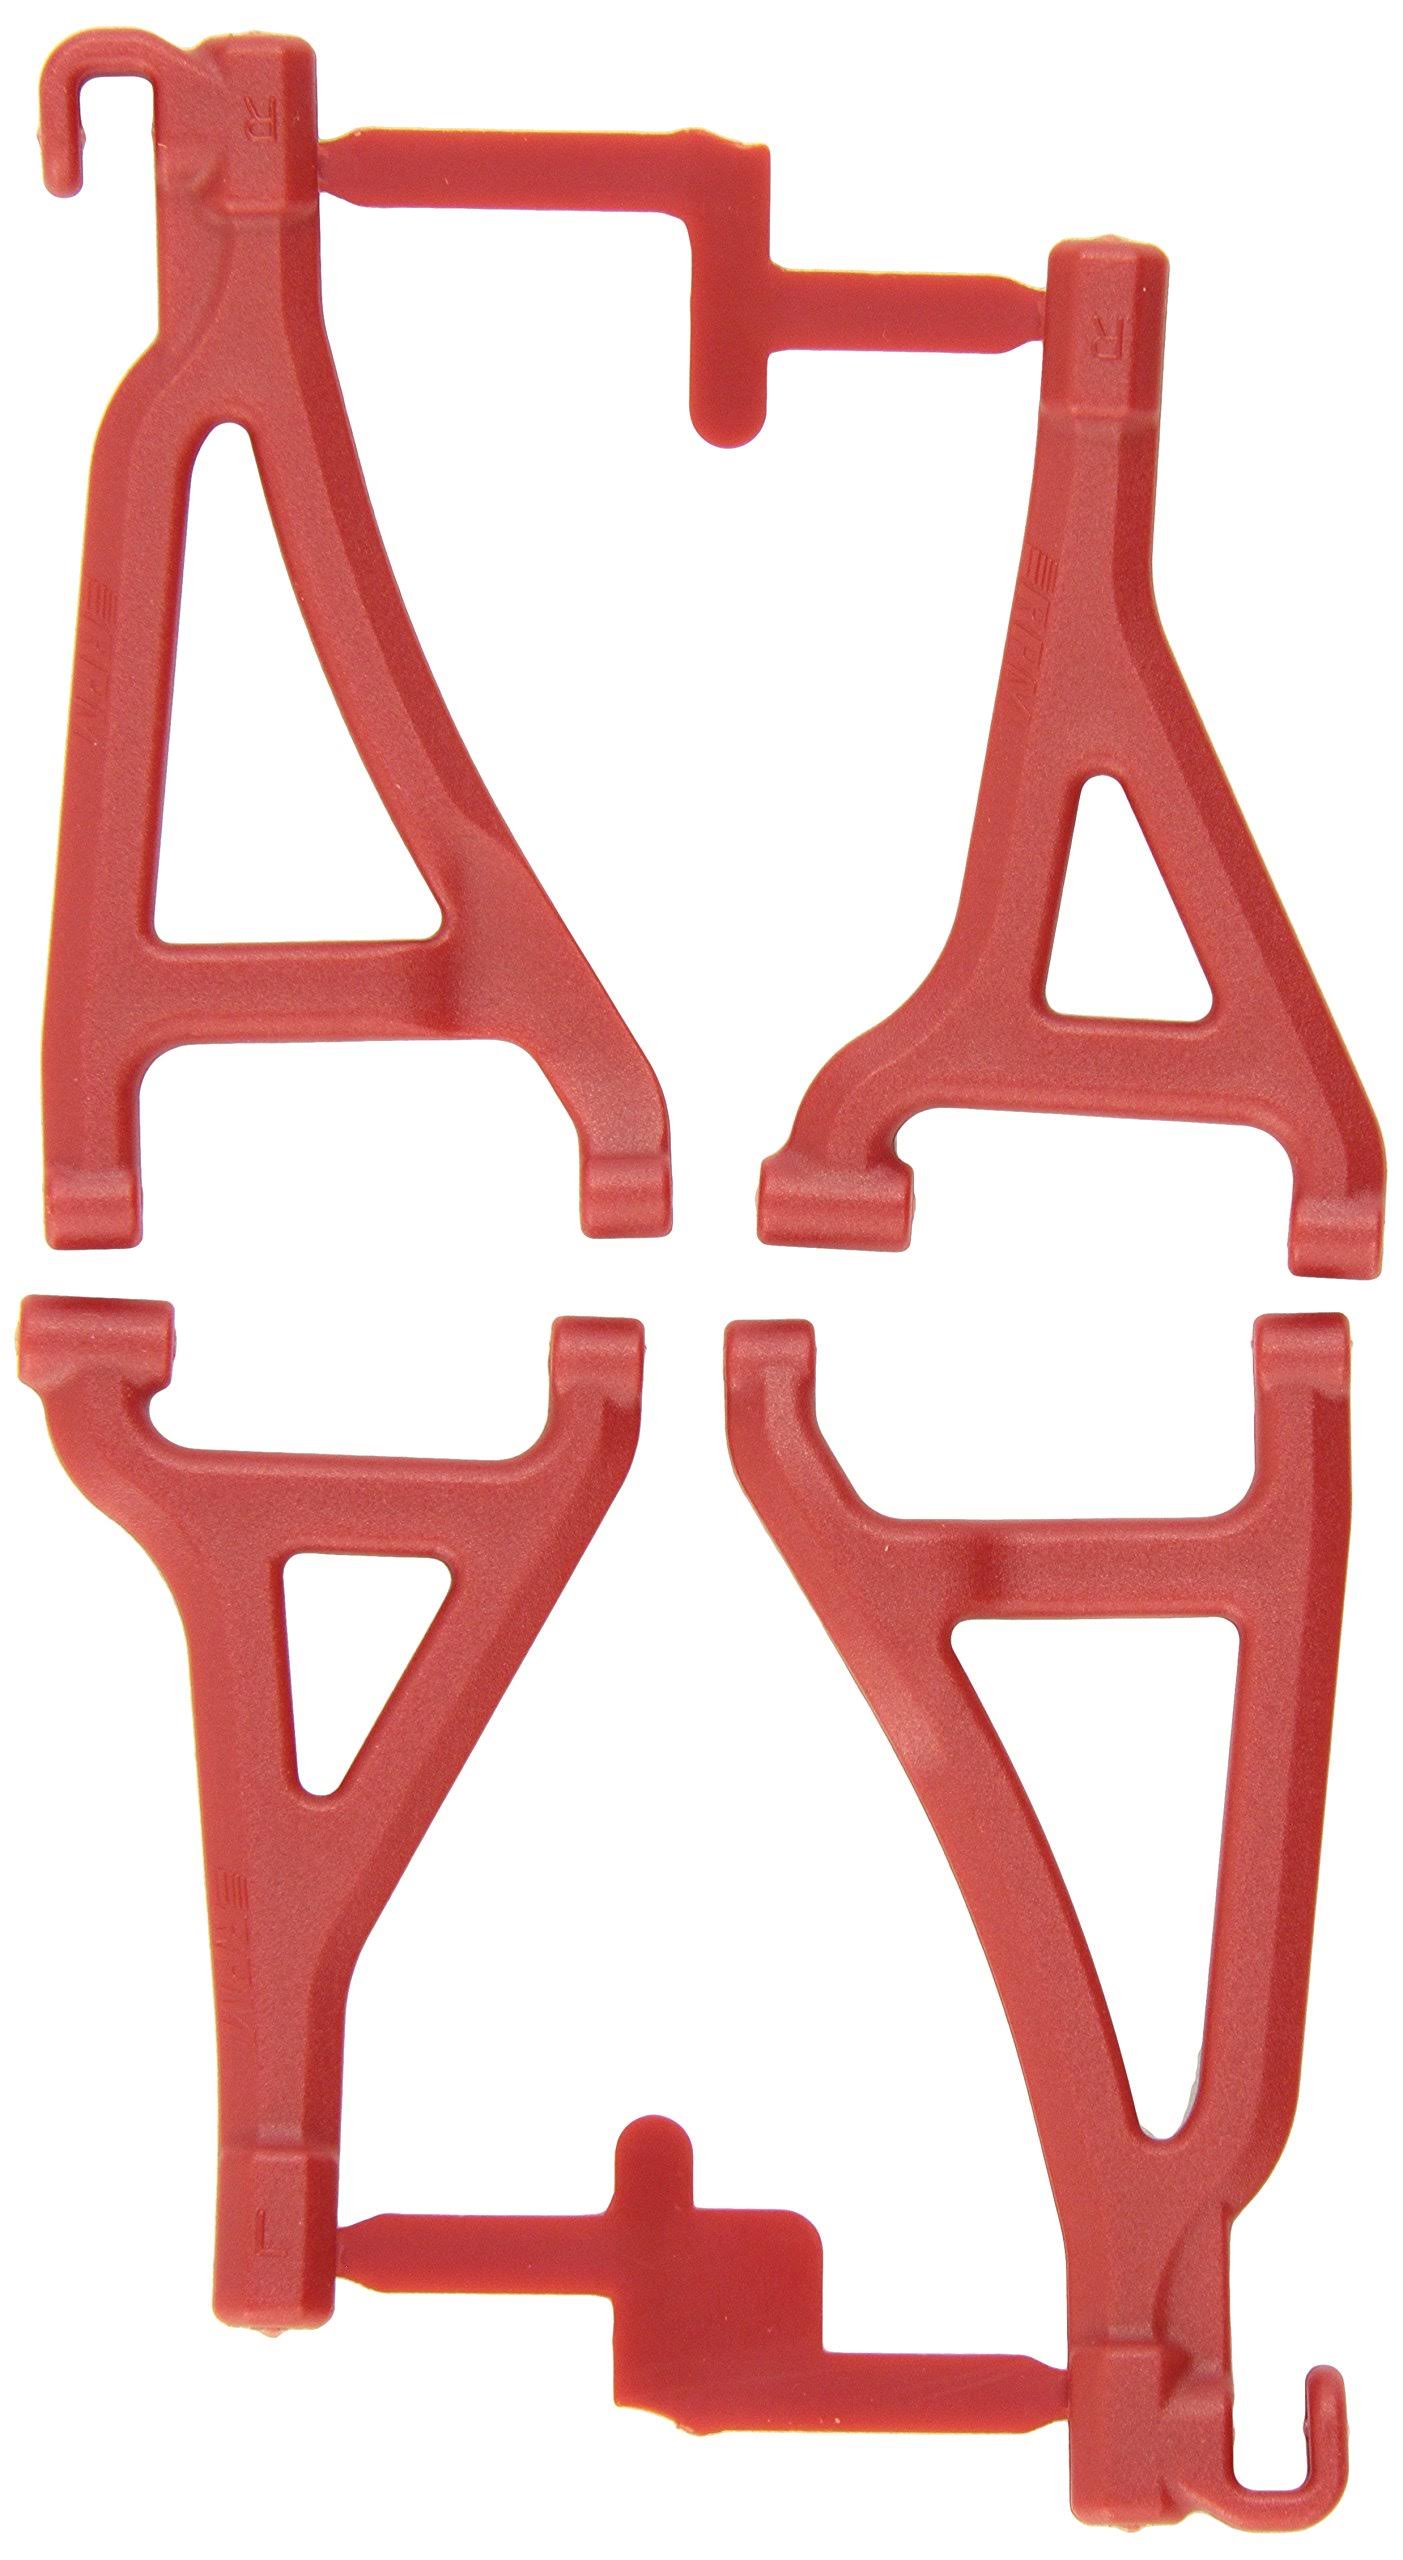 RPM Front Upper and Lower A Arms RC Part - Red, Scale 1:16